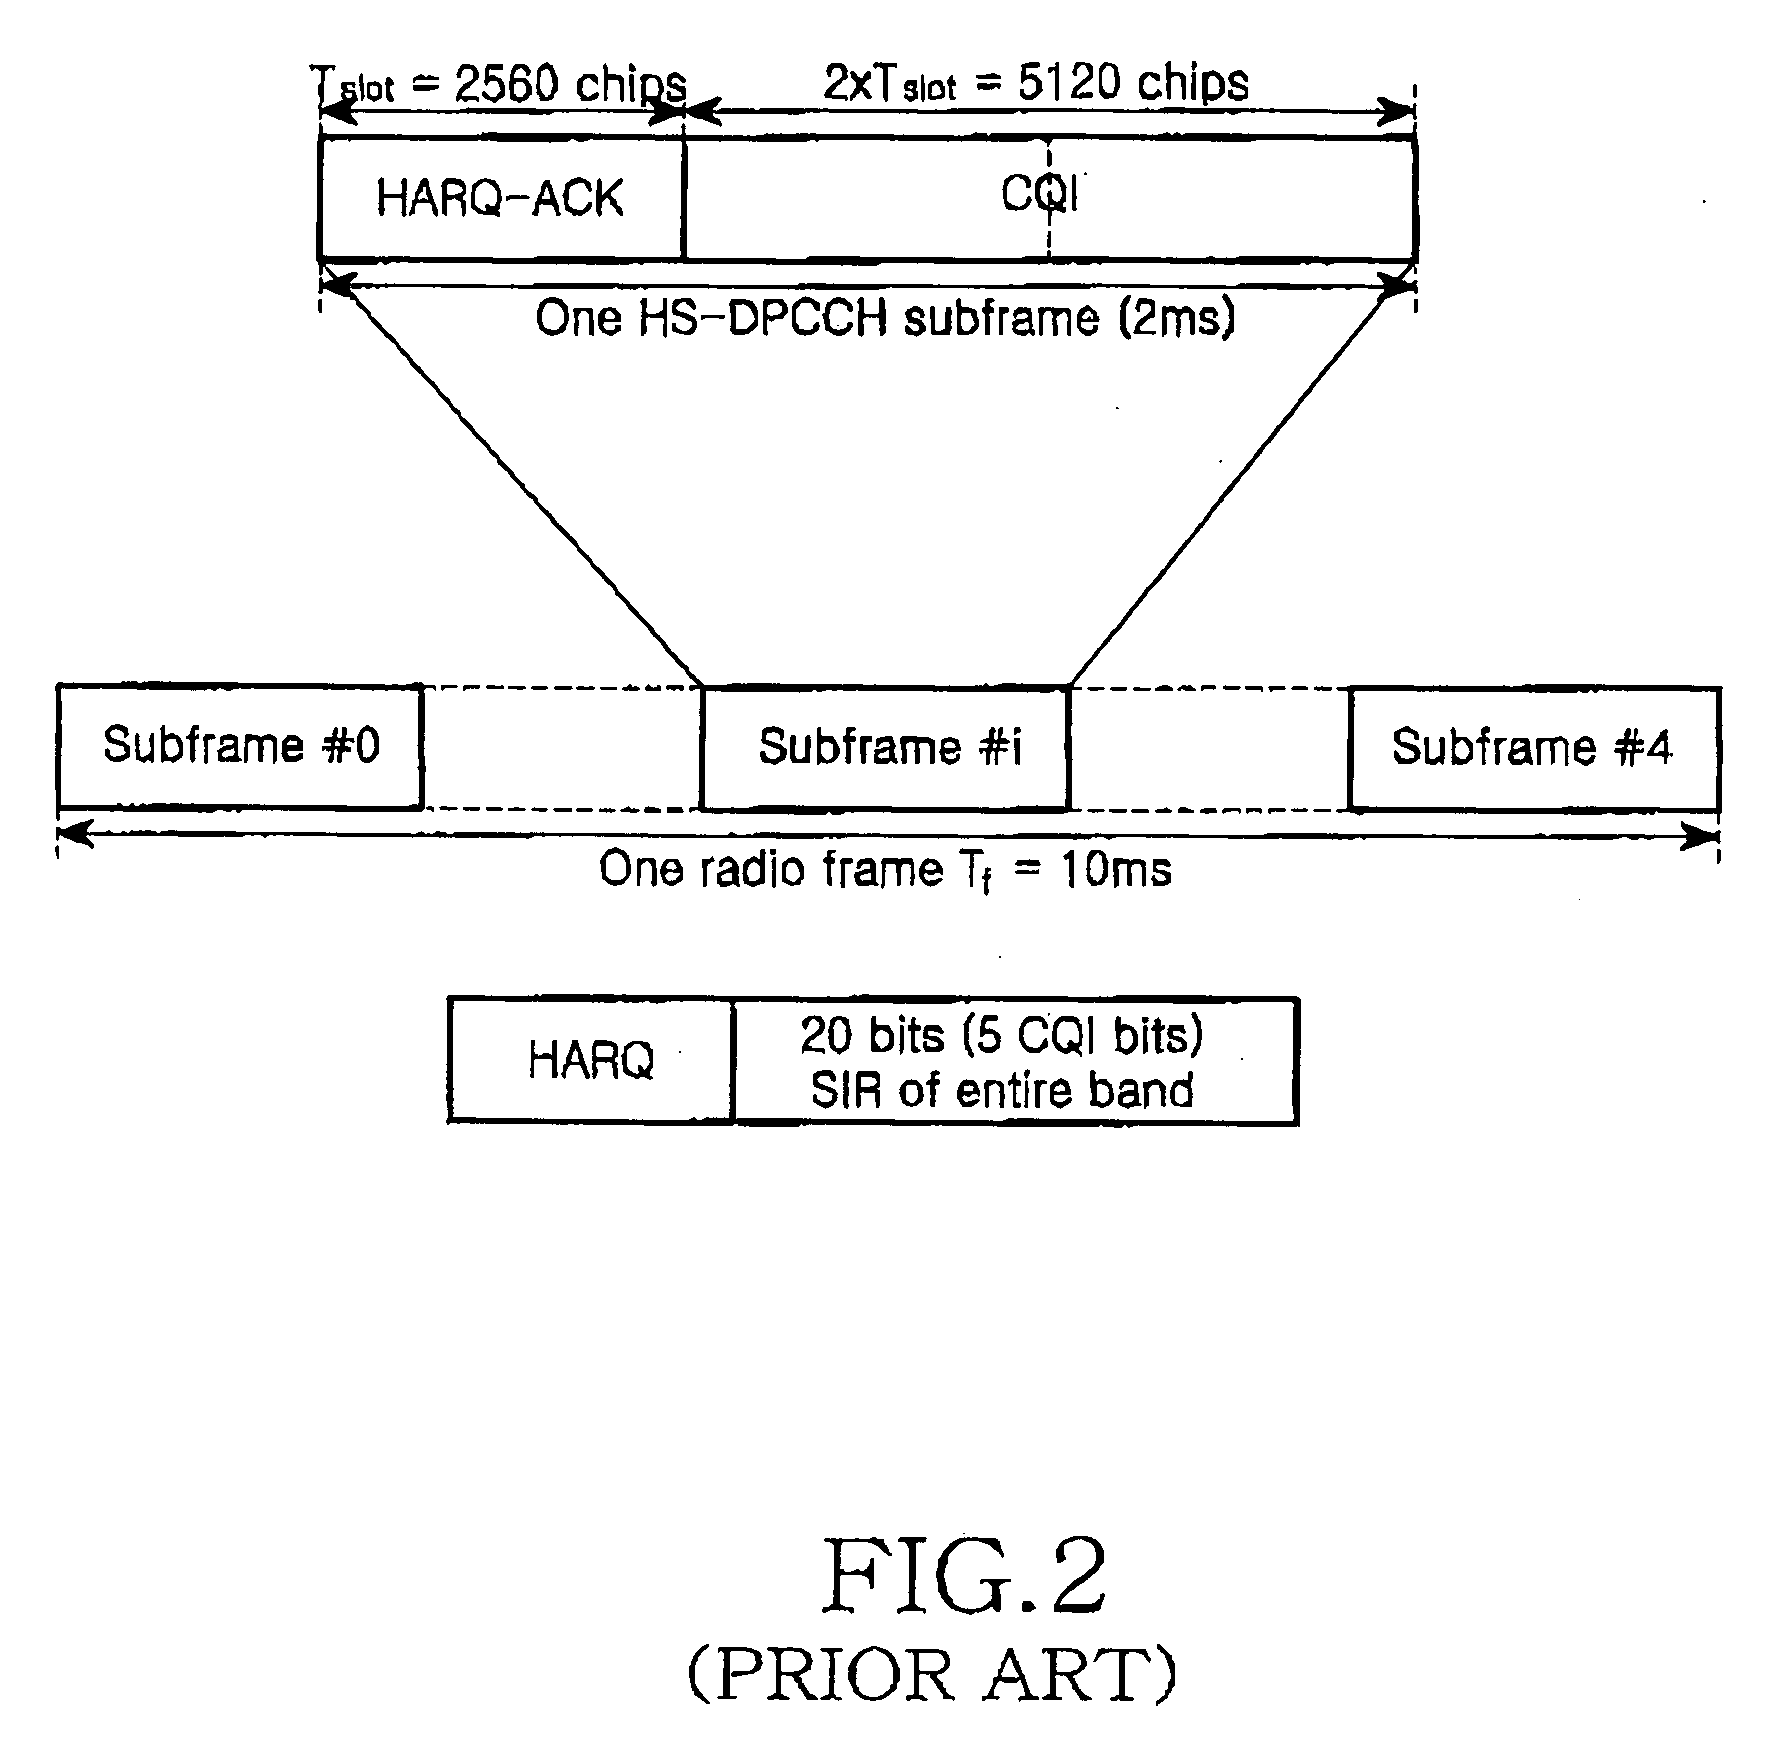 Method and apparatus for controlling transmission of channel quality information according to characteristics of a time-varying channel in a mobile communication system